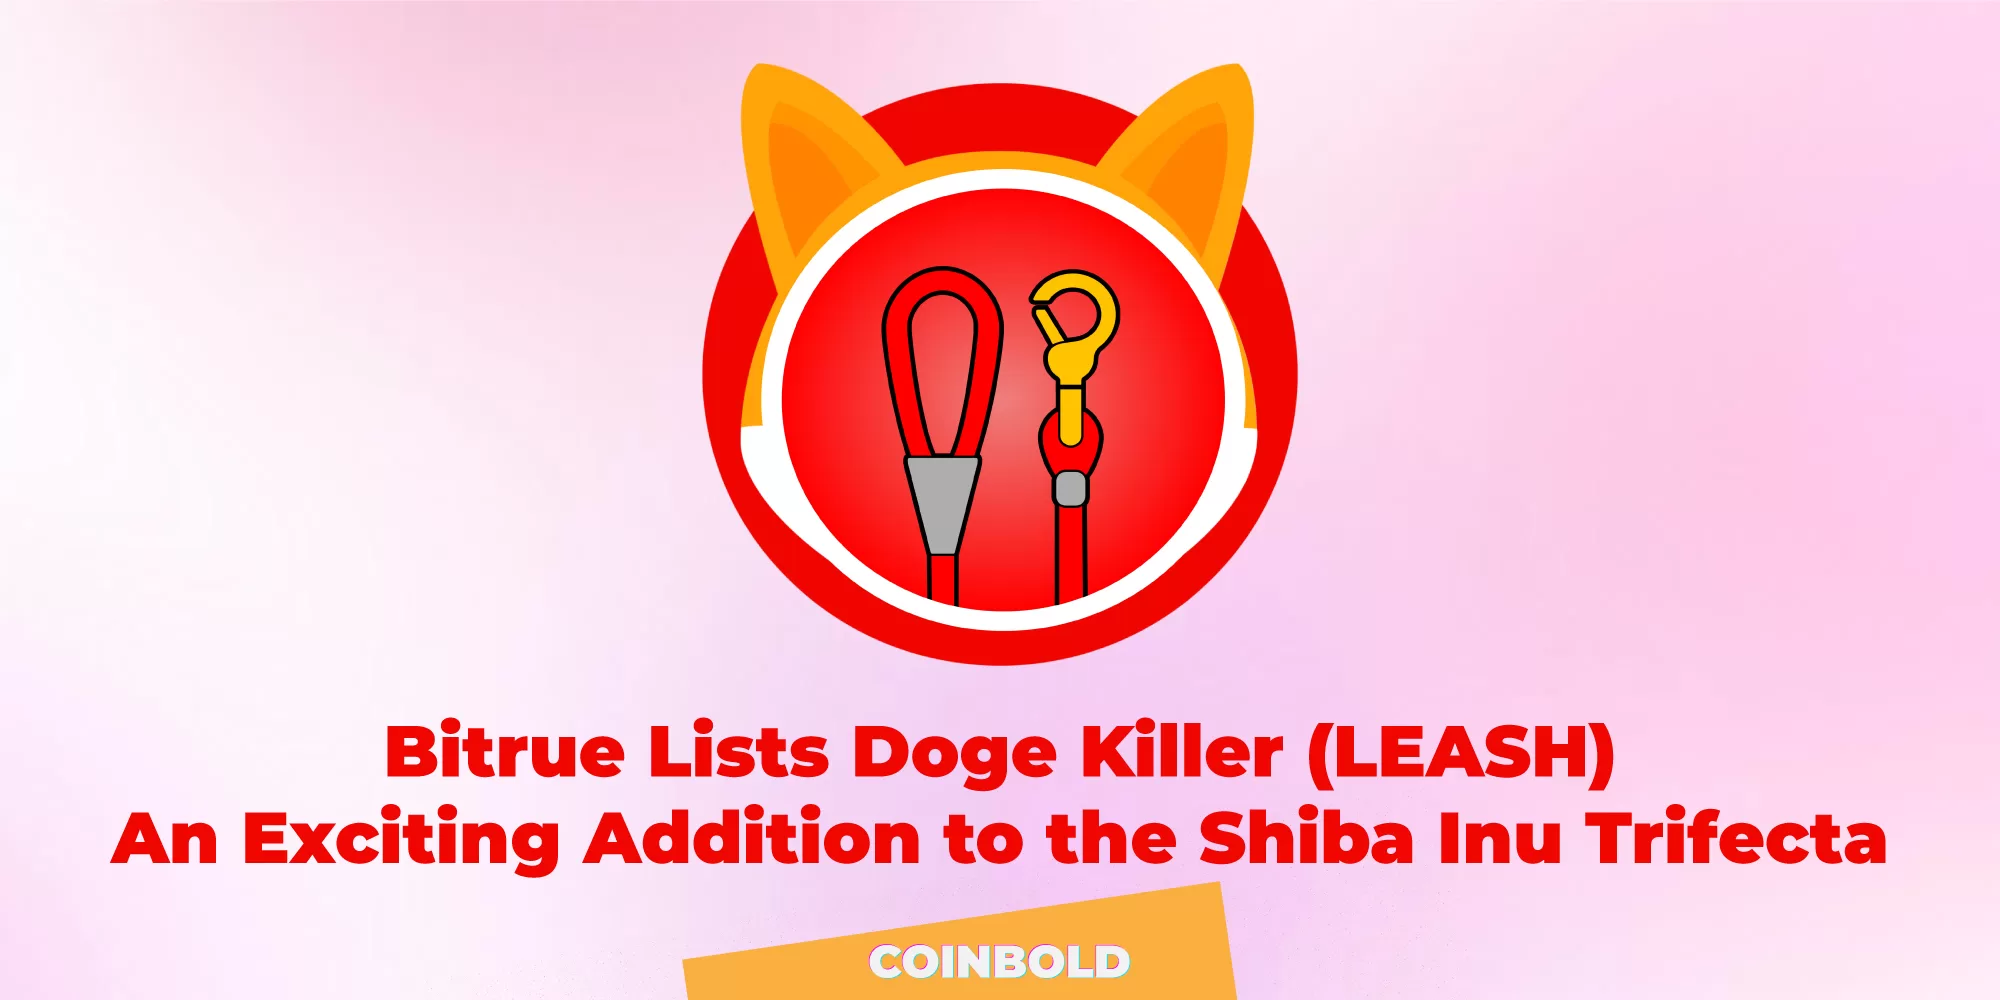 Bitrue Lists Doge Killer (LEASH): An Exciting Addition to the Shiba Inu Trifecta